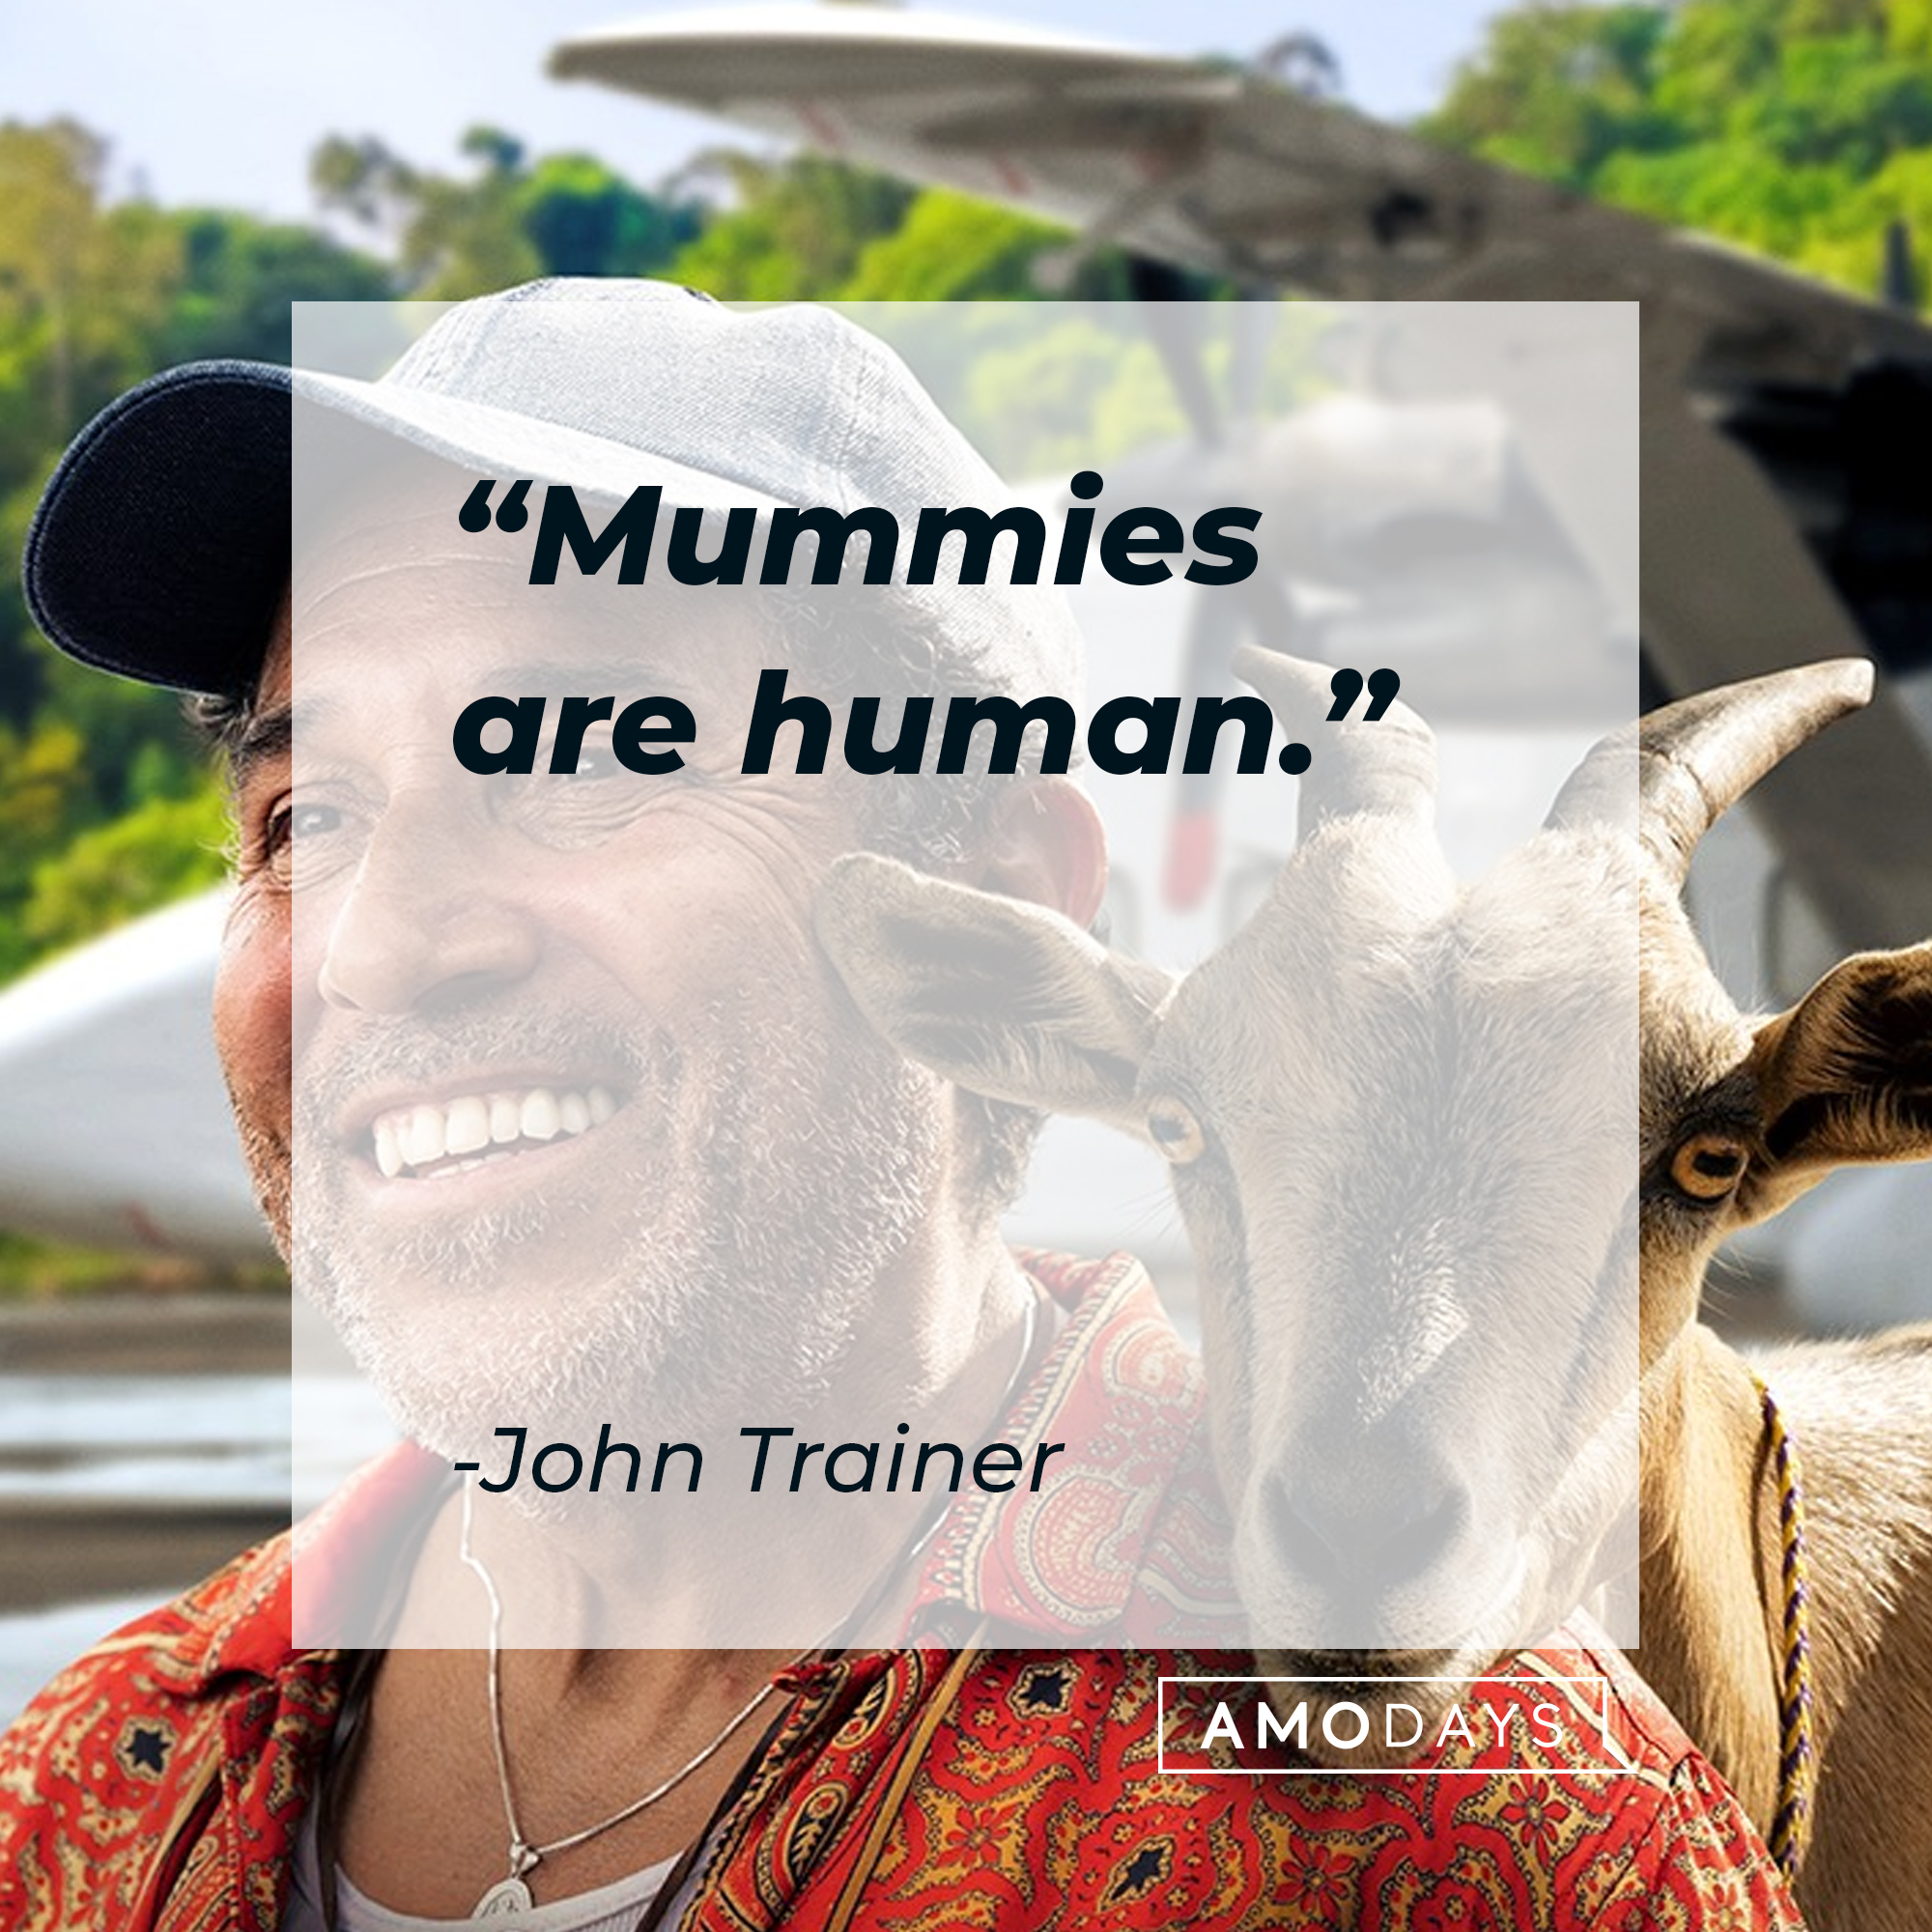 John Trainer with his quote: "Mummies are human." | Source: facebook.com/TheLostCityMovie